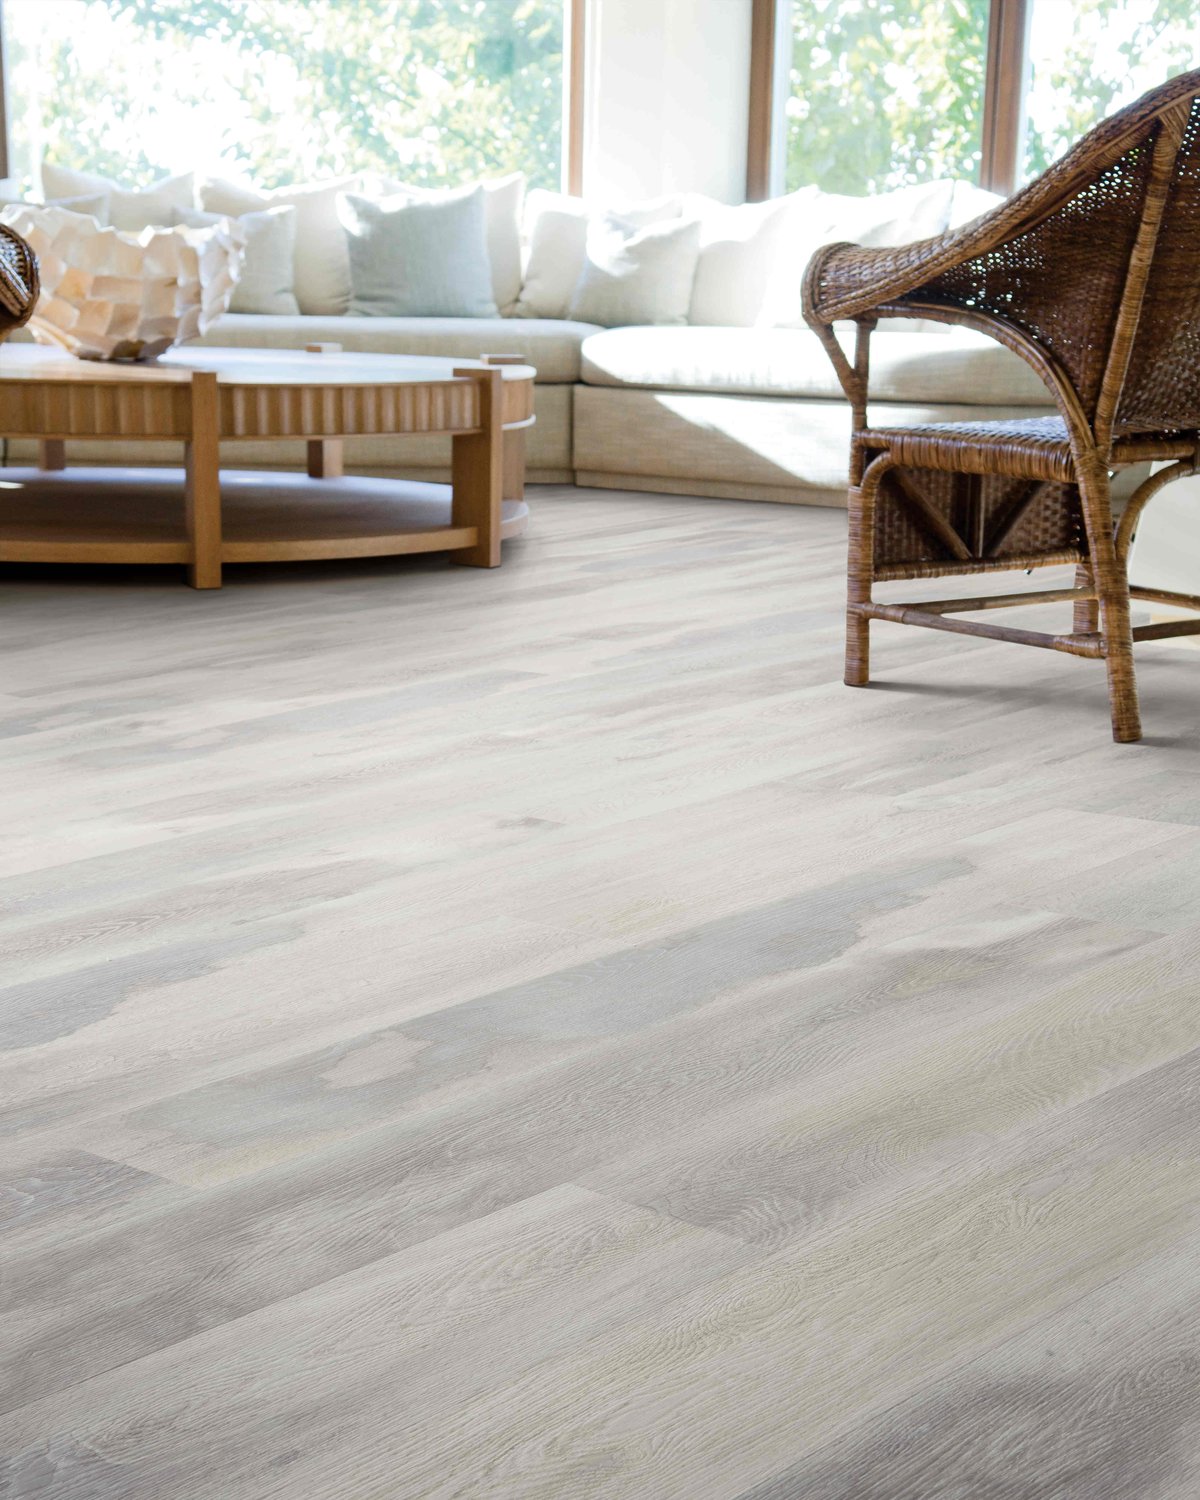 Neutral Luxury Vinyl flooring in a traditional home